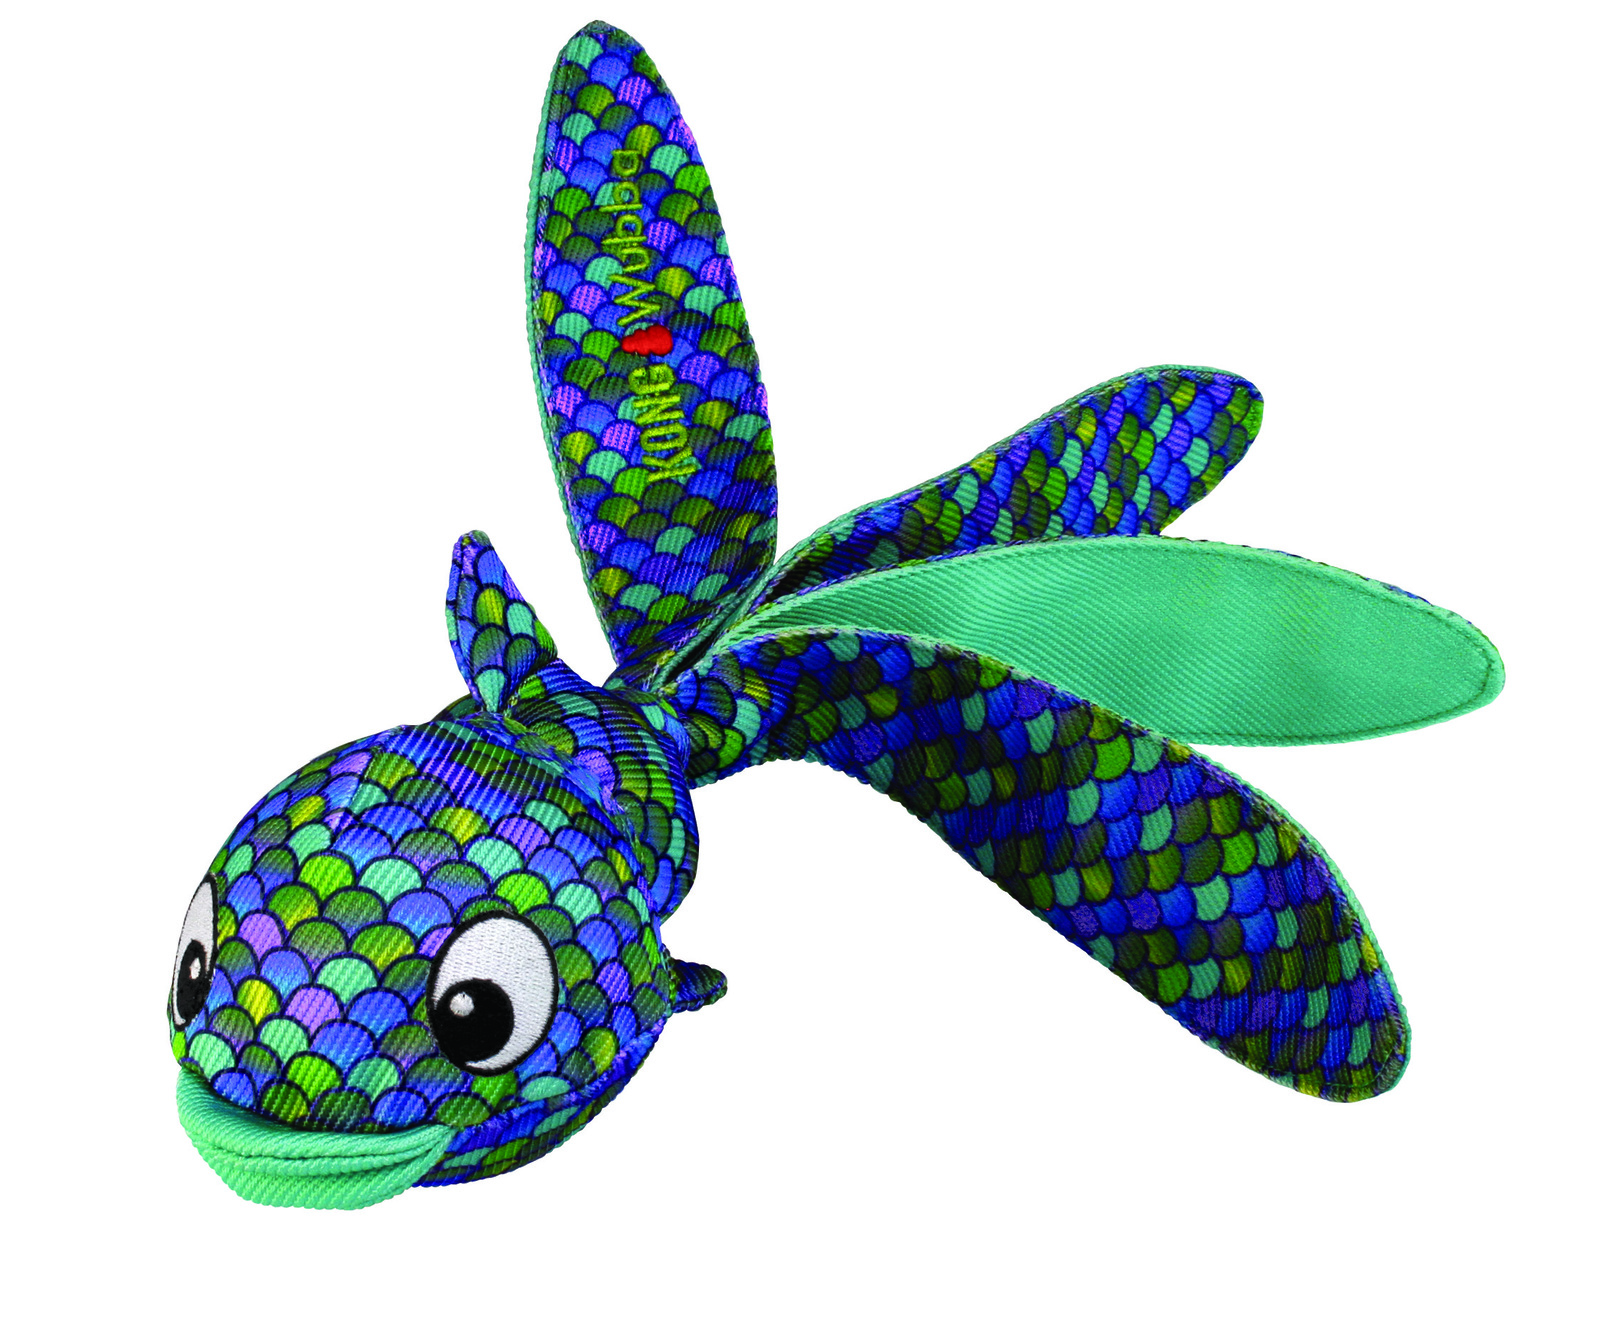 KONG Wubba Finz Fish-Faced Floppy Tailed Squeaker Fetch Dog Toy - Blue image 0